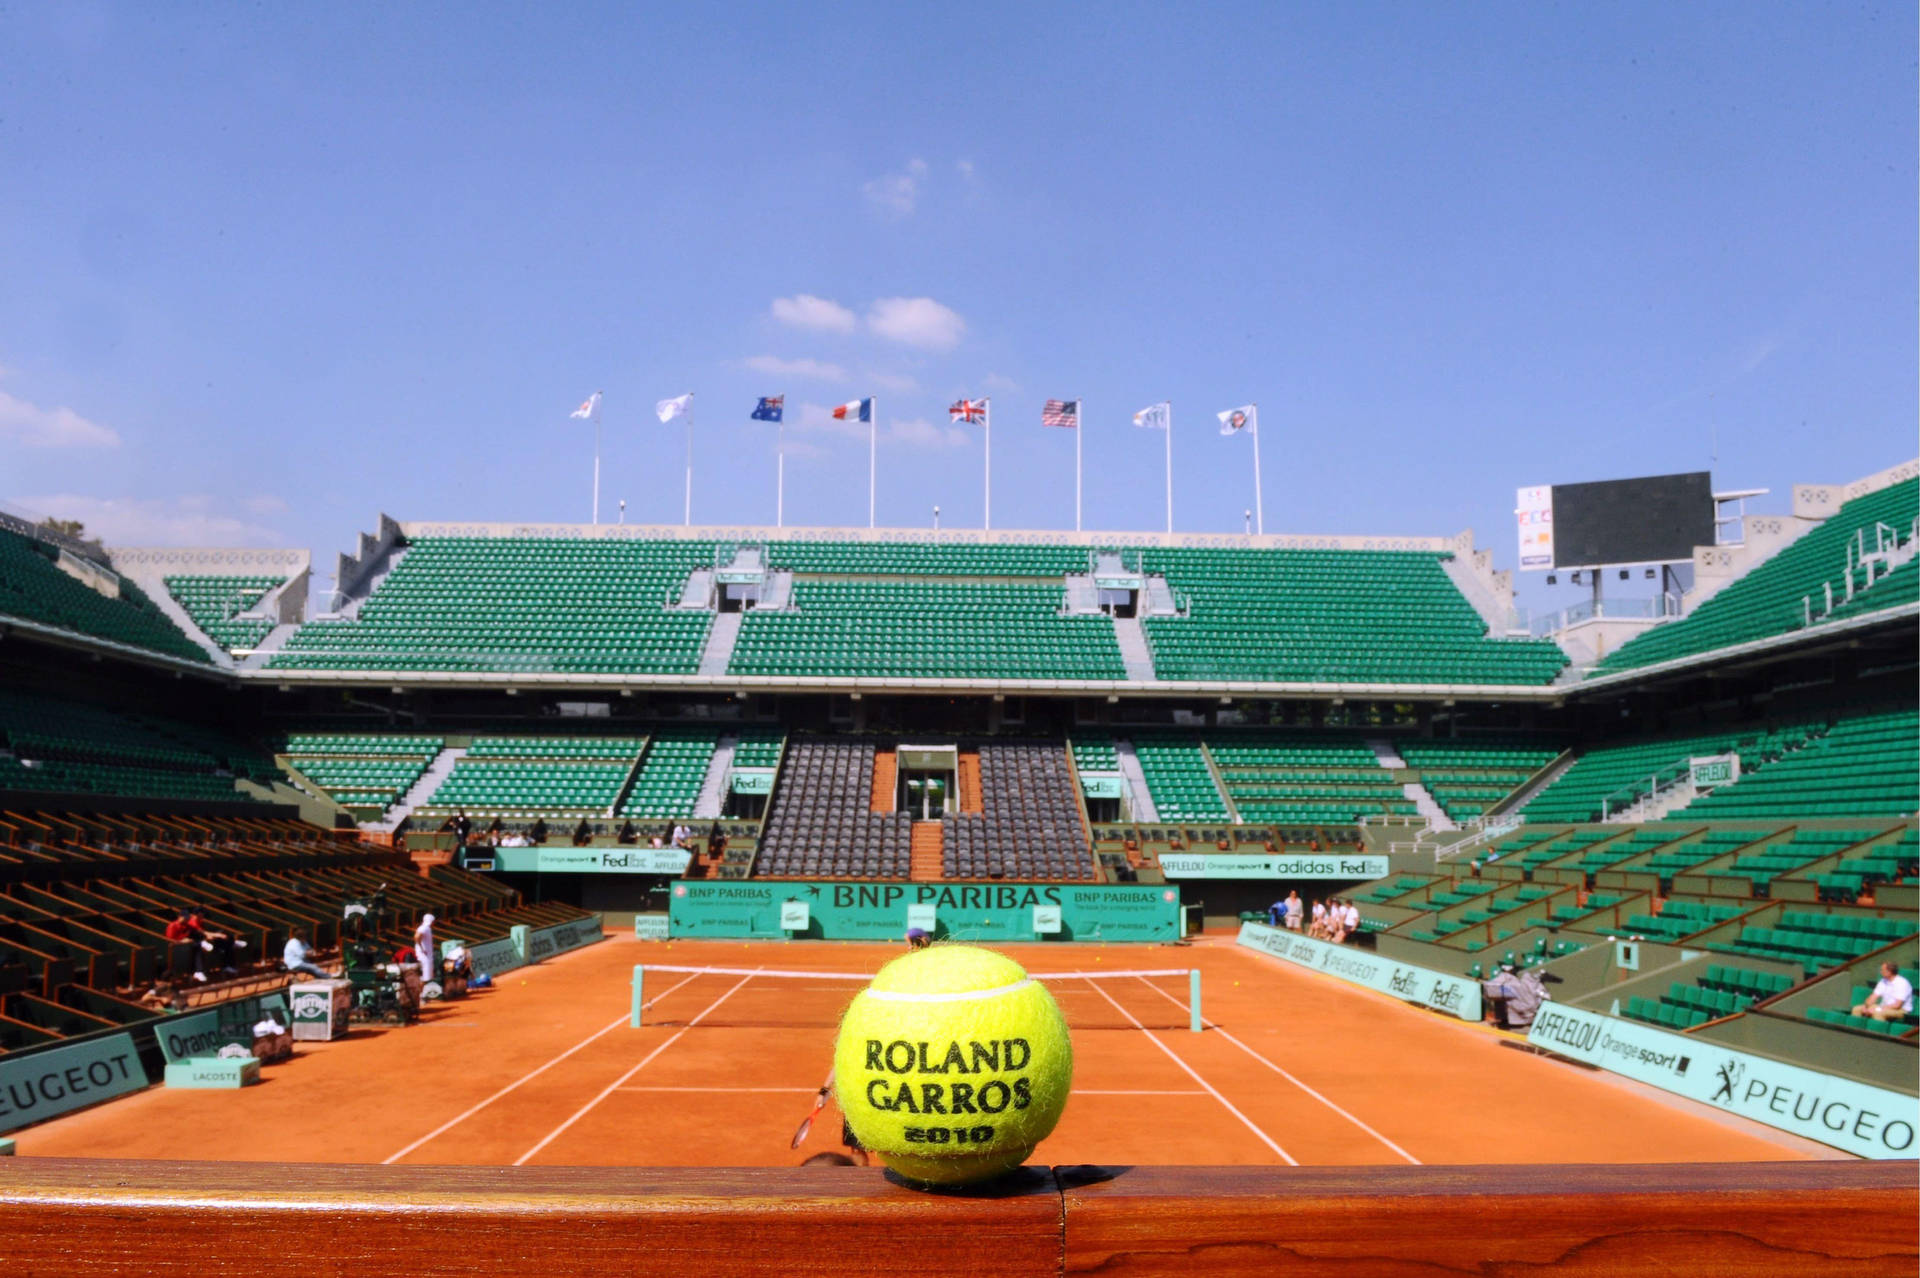 Intensity On Clay - A Close-up Of A Tennis Ball On French Open Court Background